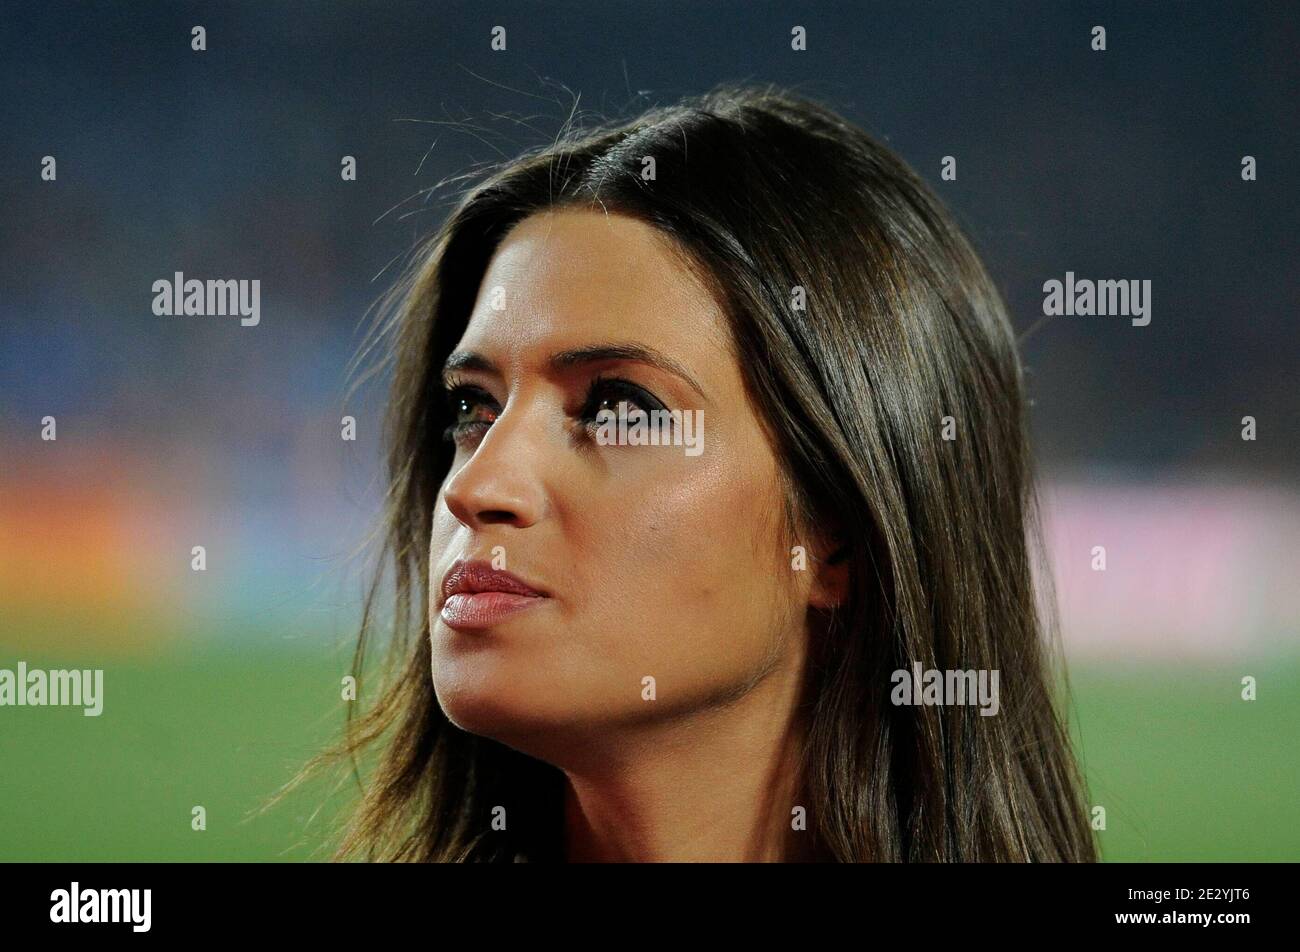 Spanish television journalist and Iker Casillas' girlfriend Sara Carbonero is seen ahead of the 2010 FIFA World Cup South Africa Soccer match, group H, Spain vs Honduras at Ellis Park football stadium in Johannesburg, South Africa on June 21, 2010. Spain won 2-0. Photo by Henri Szwarc/ABACAPRESS.COM Stock Photo